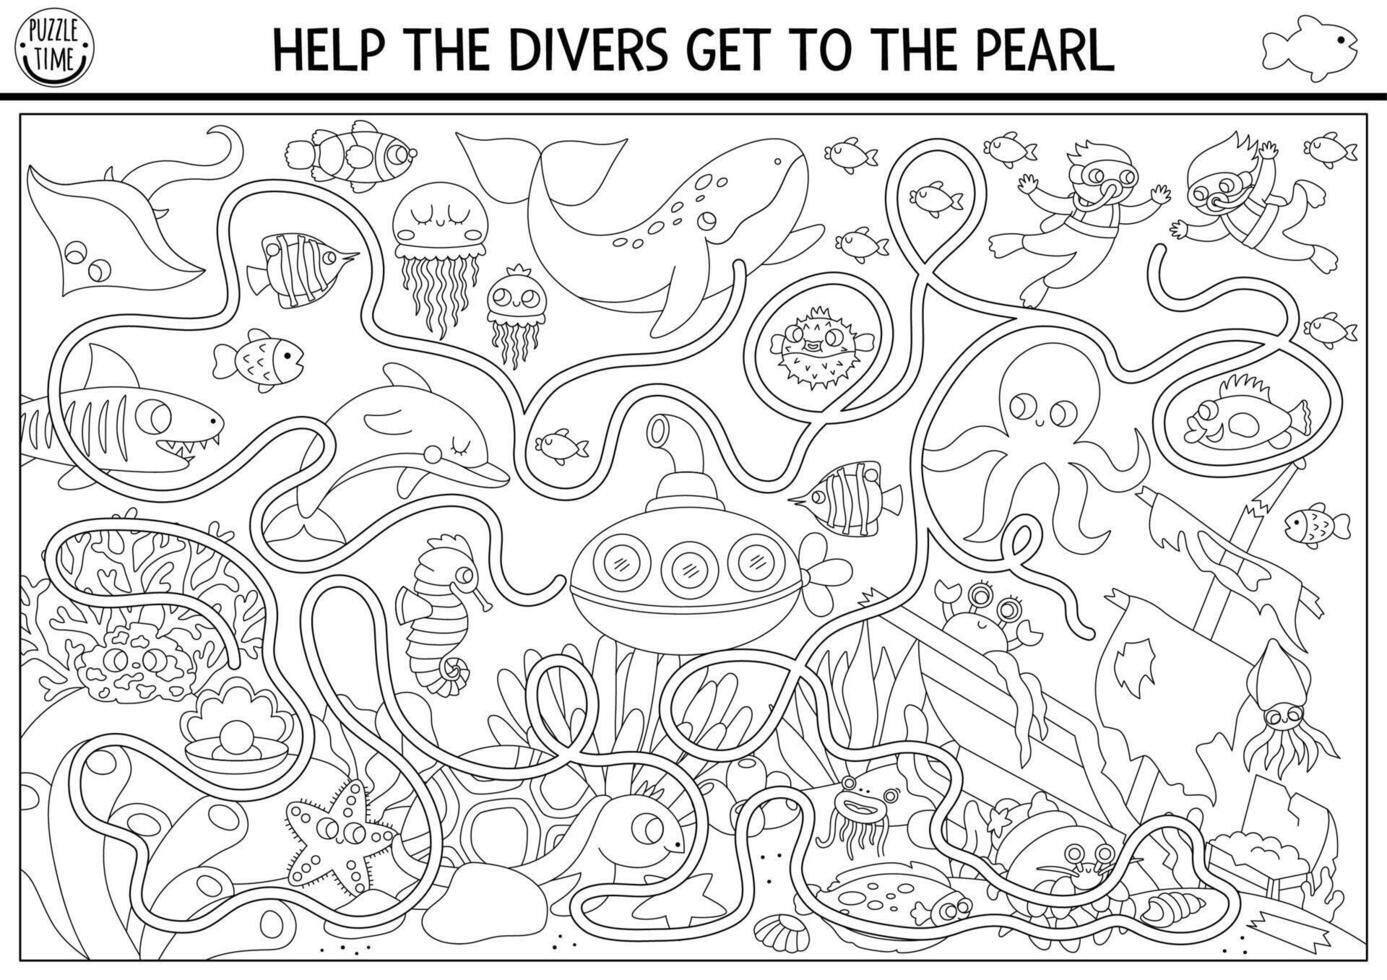 Under the sea black and white maze with marine landscape, wrecked ship, fish. Ocean line preschool activity with dolphin, whale. Water labyrinth game, coloring page. Help divers get to pearl vector